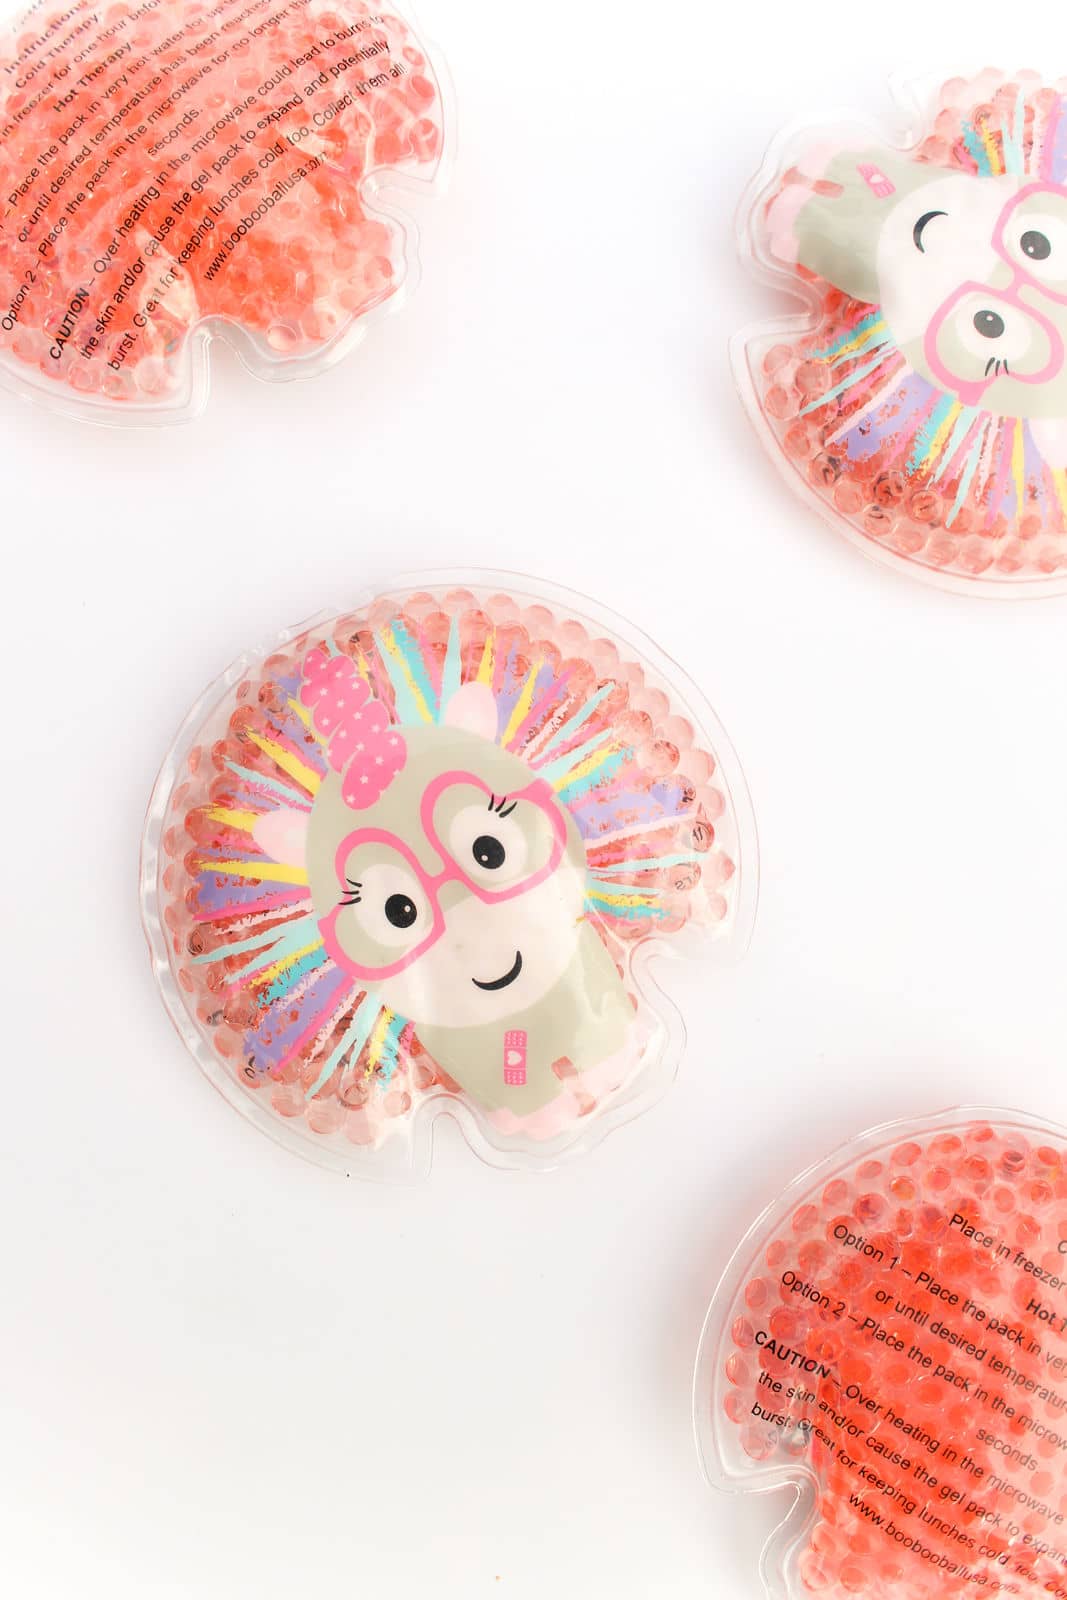 Unicorn Ice Pack: Lily | Non-Toxic Kids Ice Pack | BOO BOO BALL™